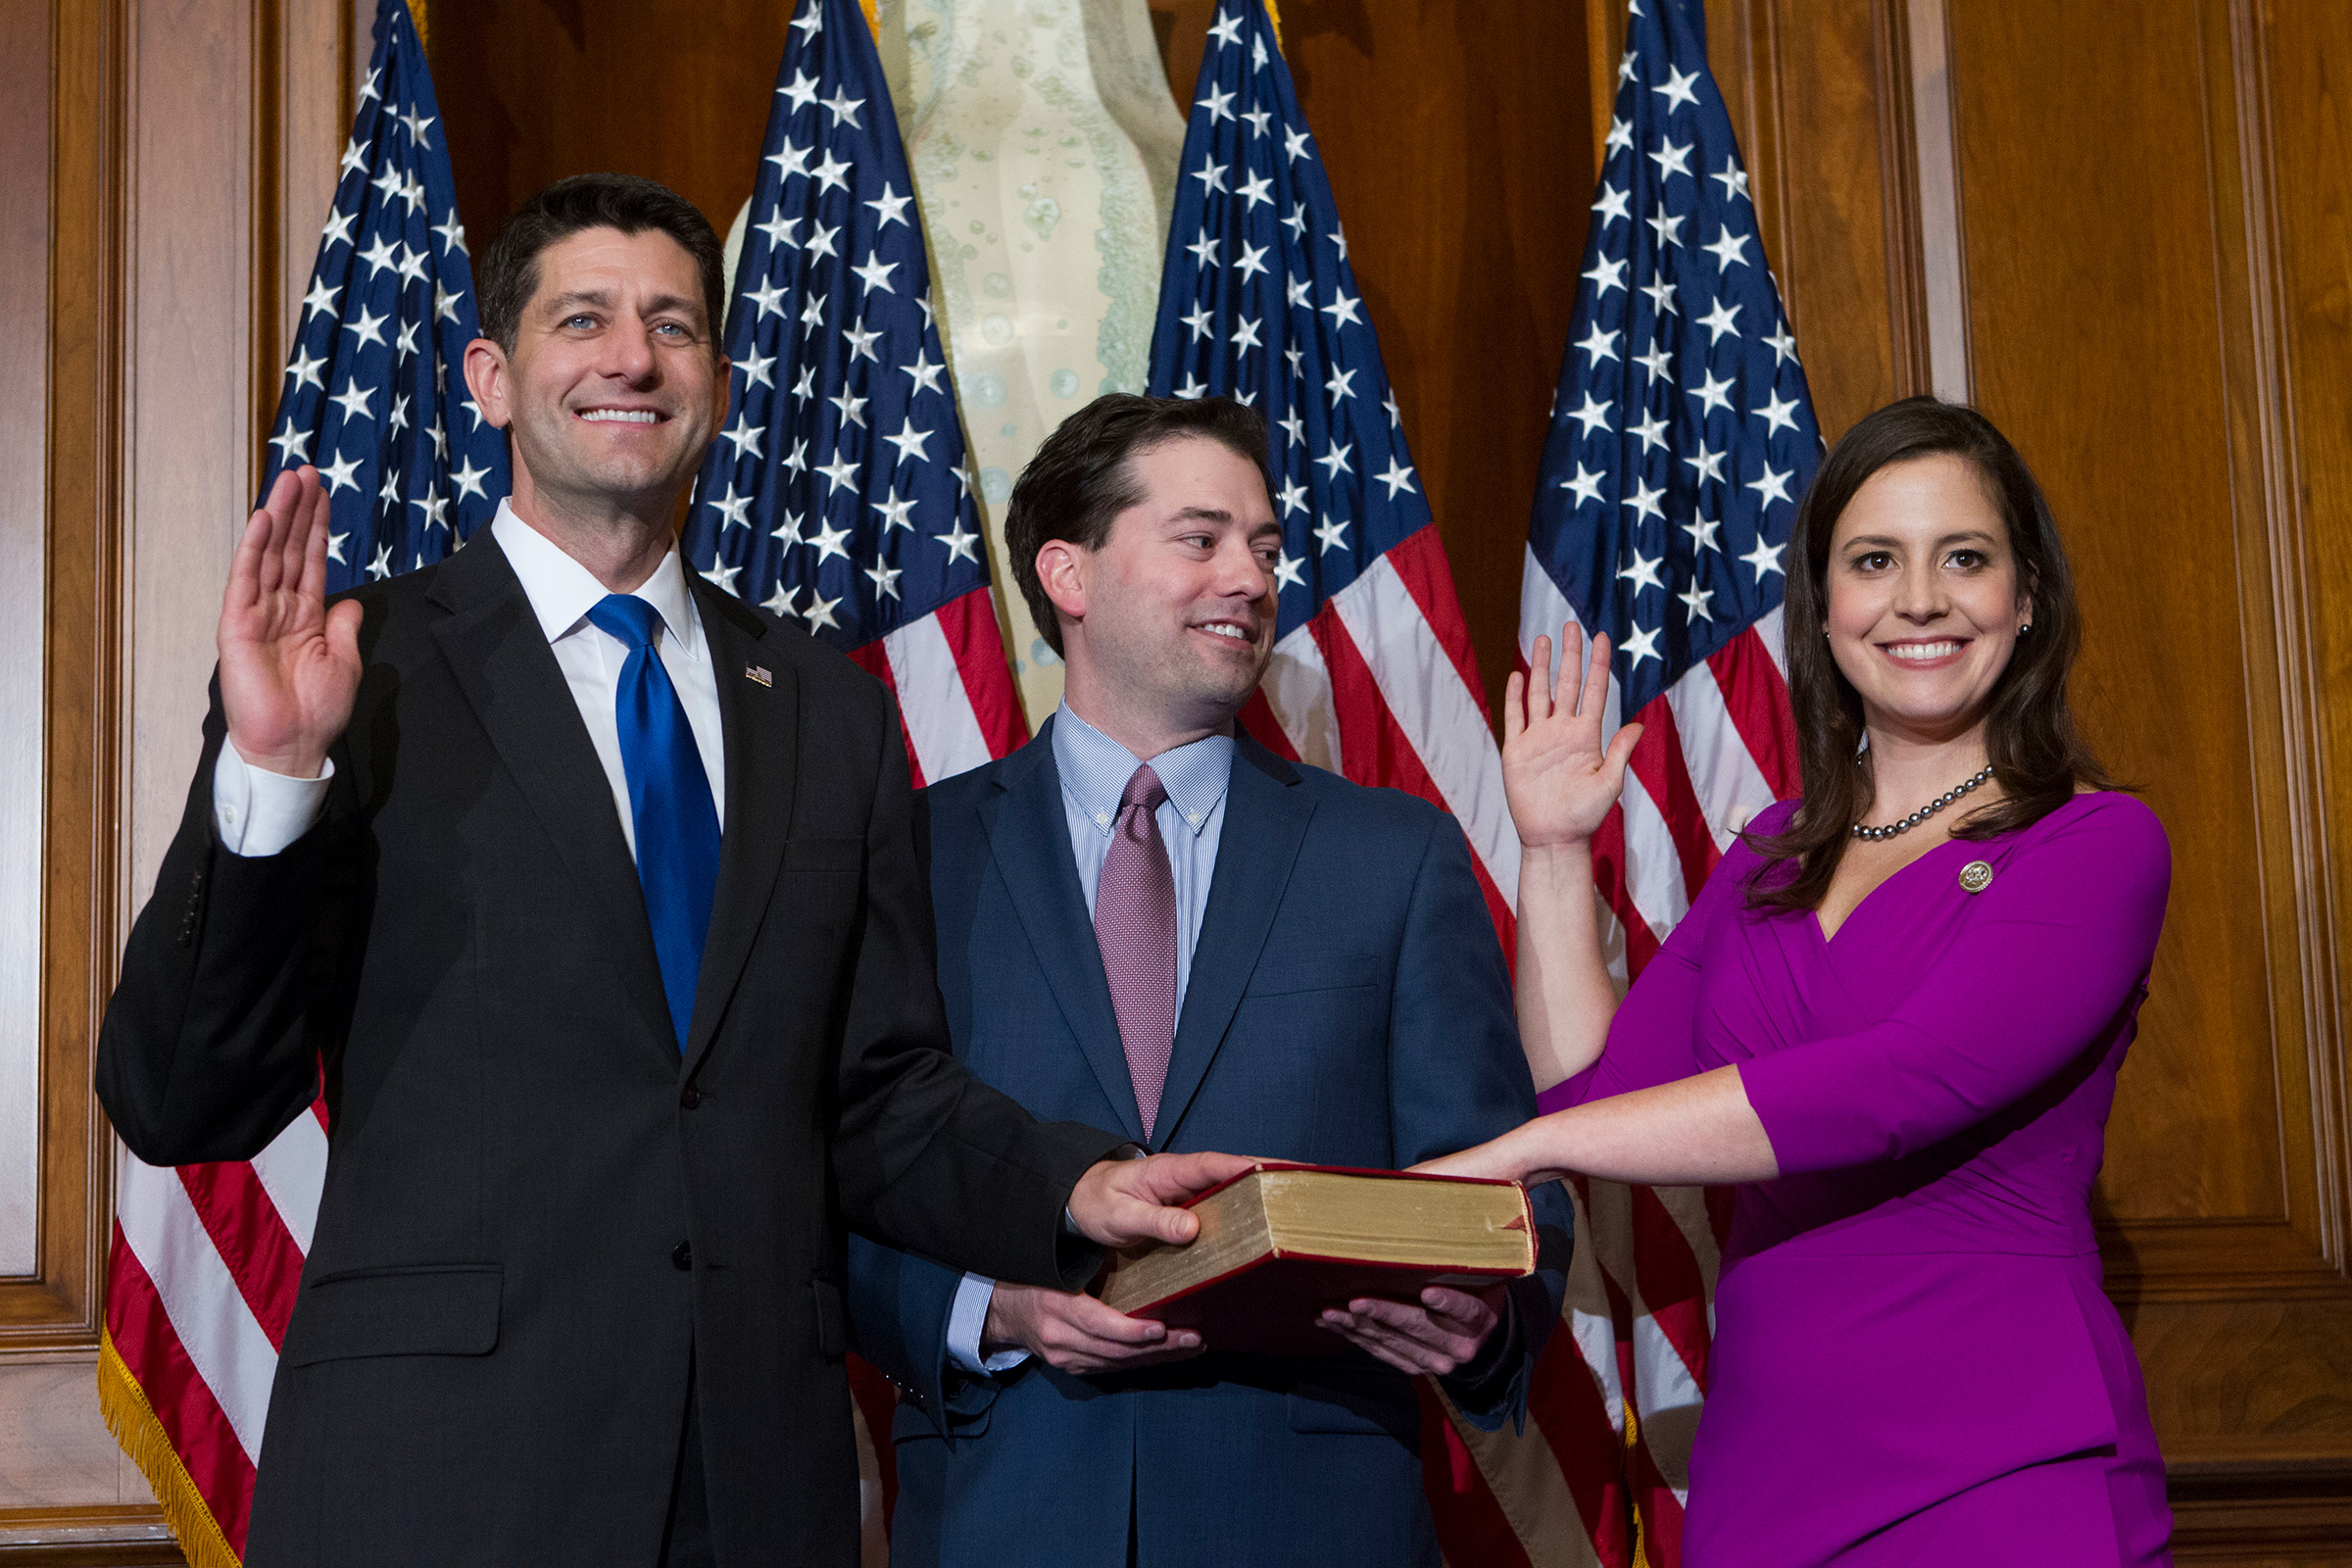 Former House Speaker Paul Ryan administers the House oath of office to Elise Stefanik during a mock swearing in ceremony on Capitol Hill in Washington, Jan. 3, 2017, as the 115th Congress began.